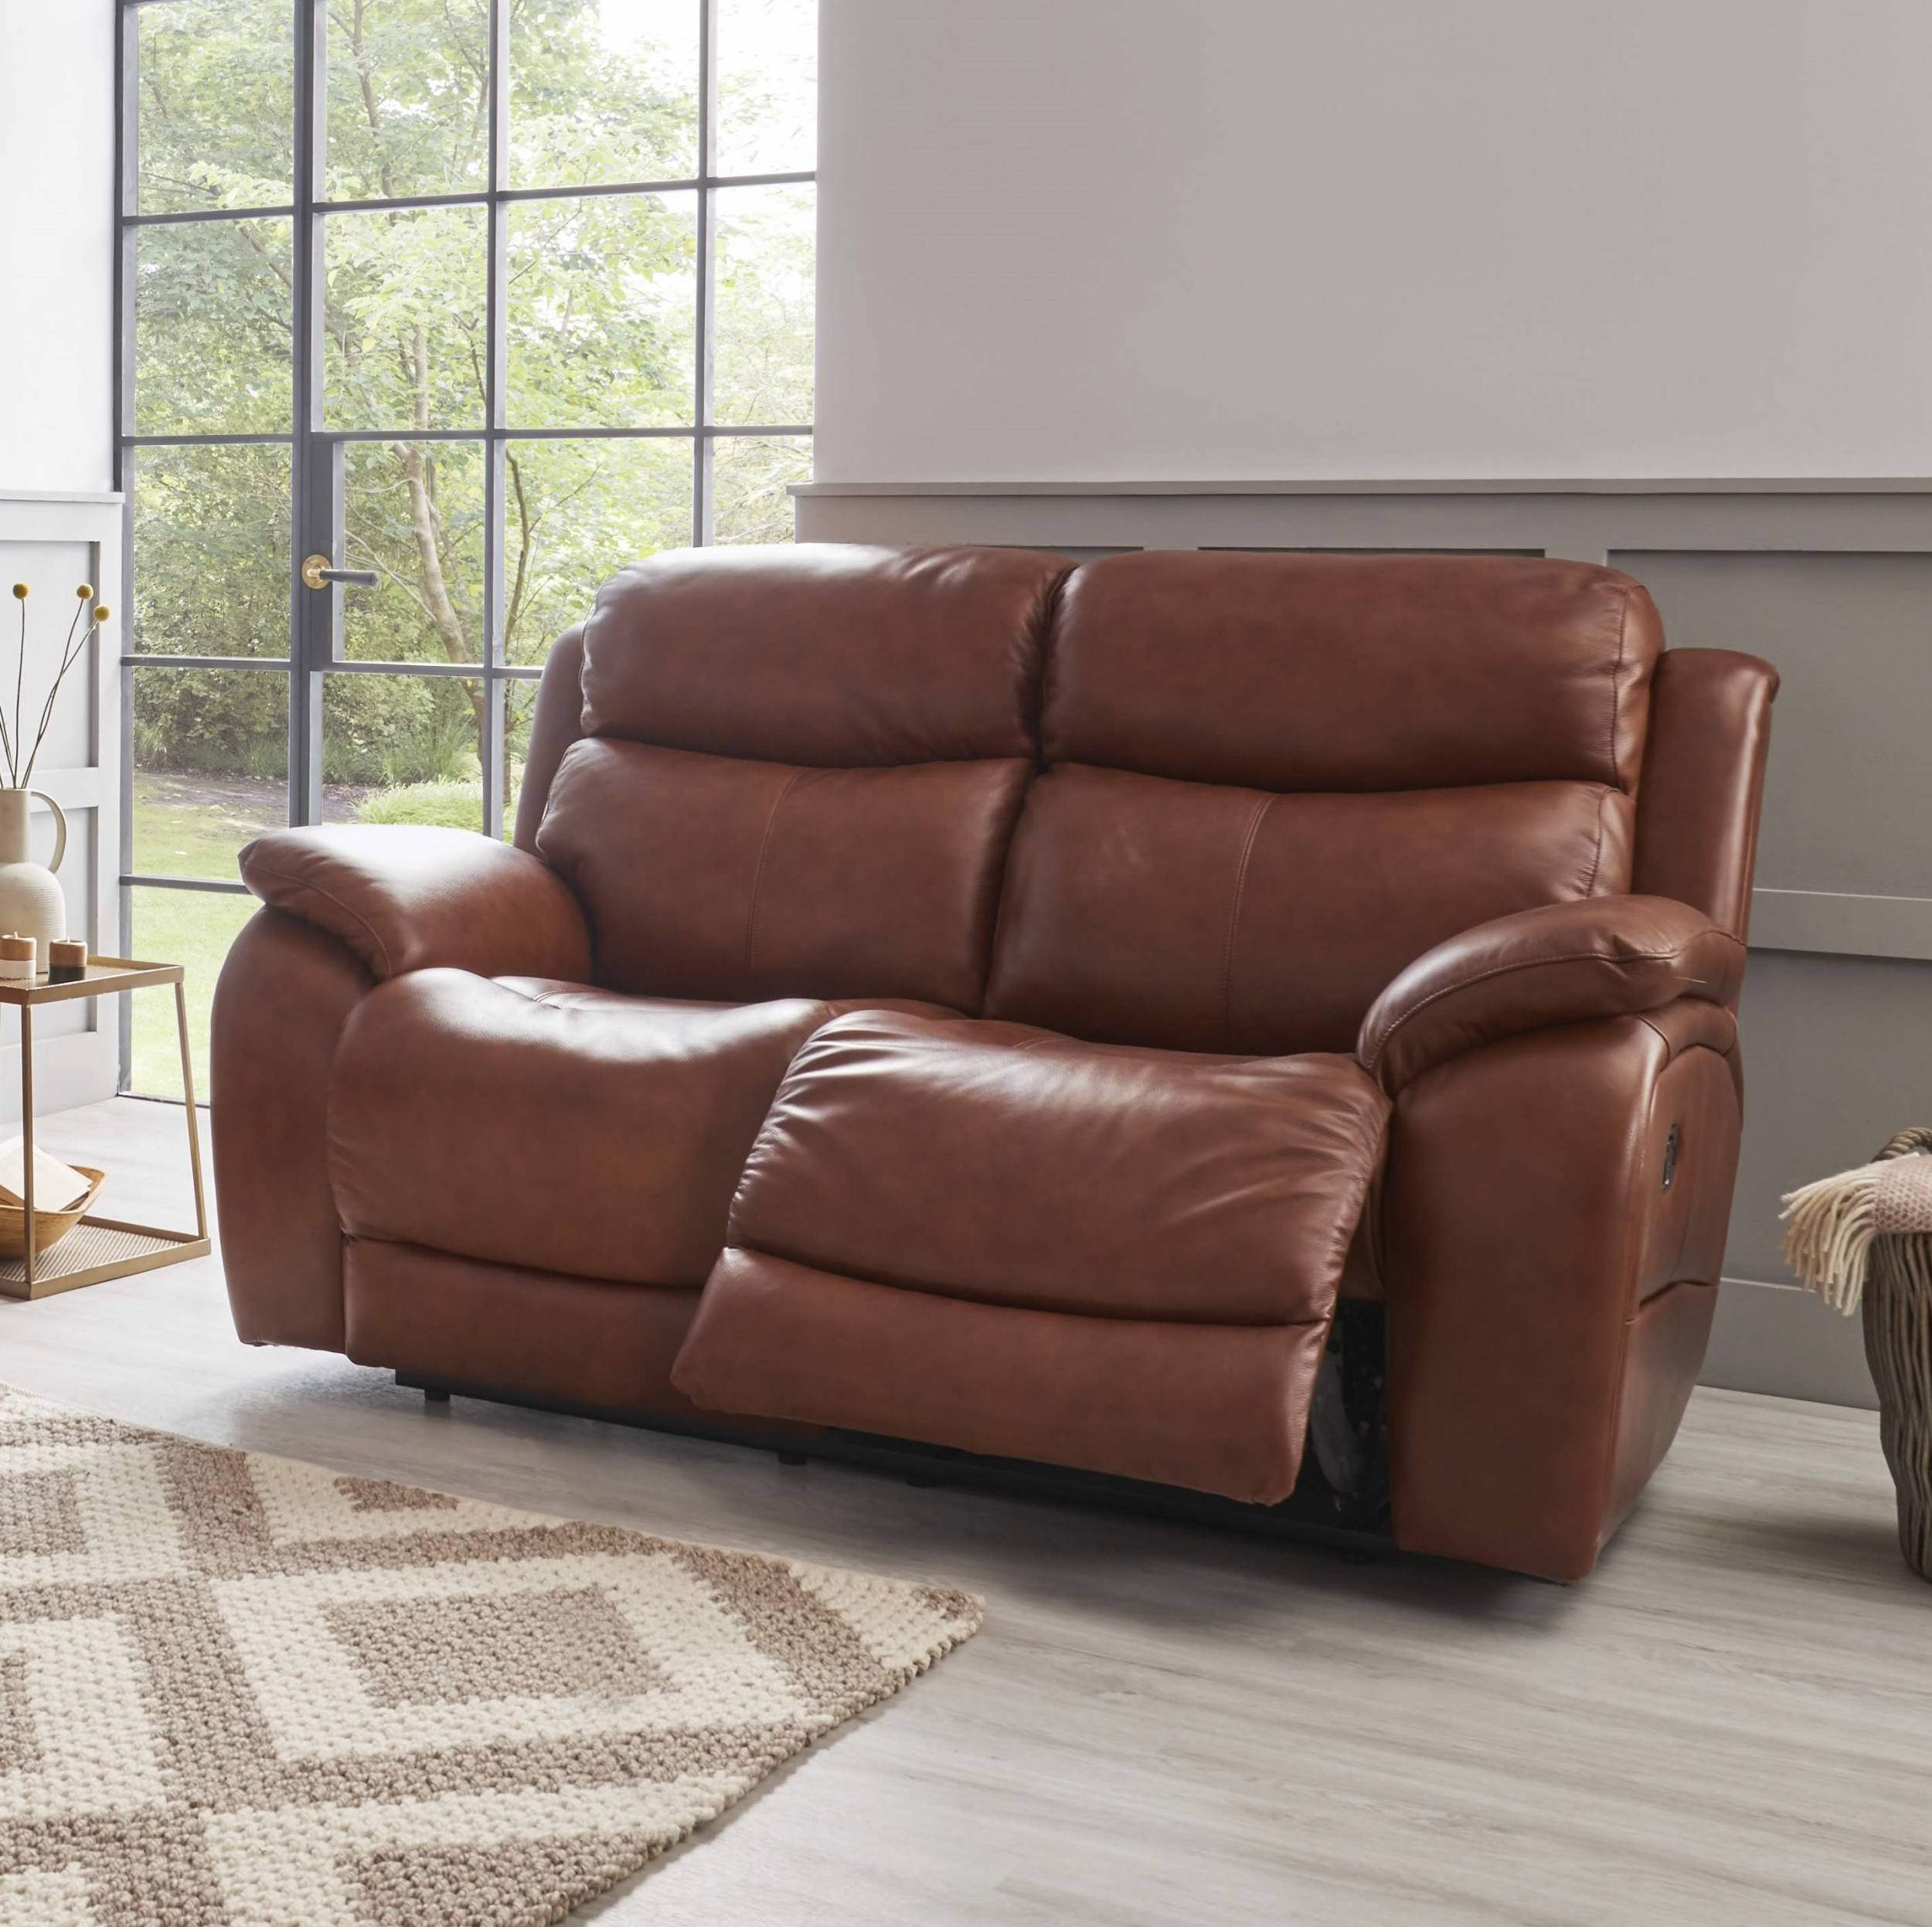 La-Z-Boy Ely 2 Seater Manual Recliner Sofa - Fabric / Leather at Style ...